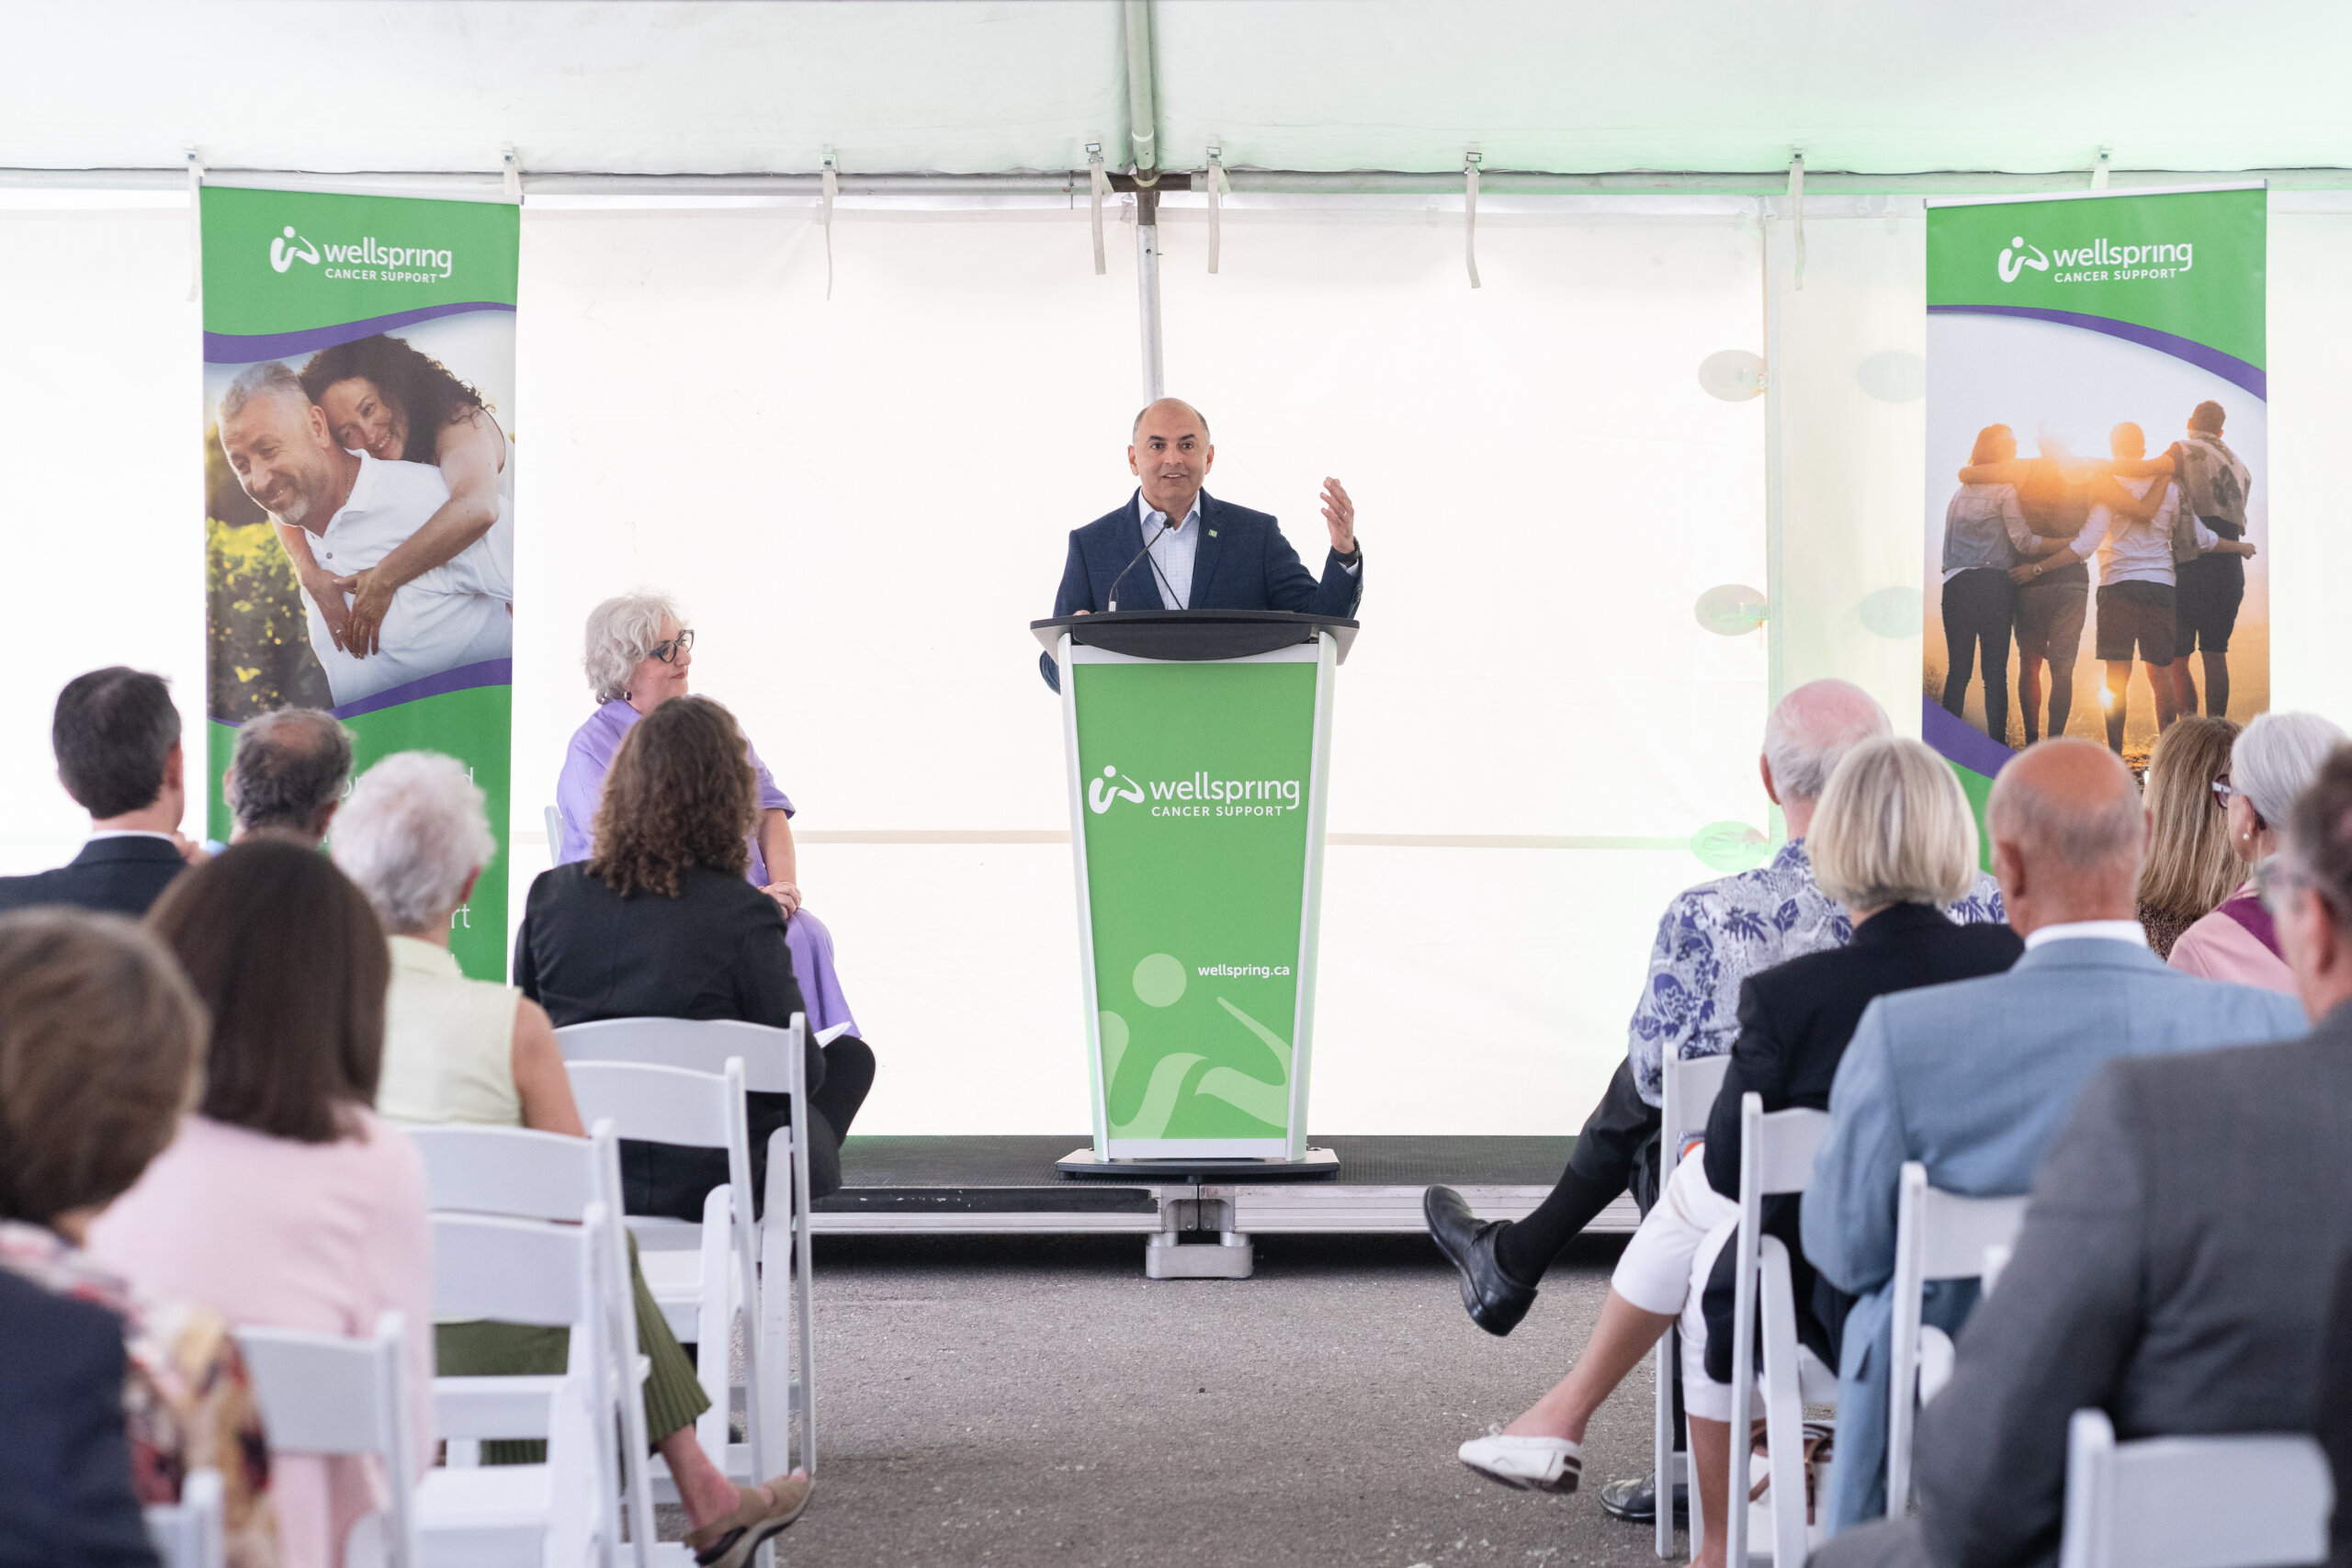 Rizwan Khalfan, Chief Digital and Payments Officer, TD Bank Group, announcing $600,000 donation for Virtual Centre for Cancer Support at Wellspring event.